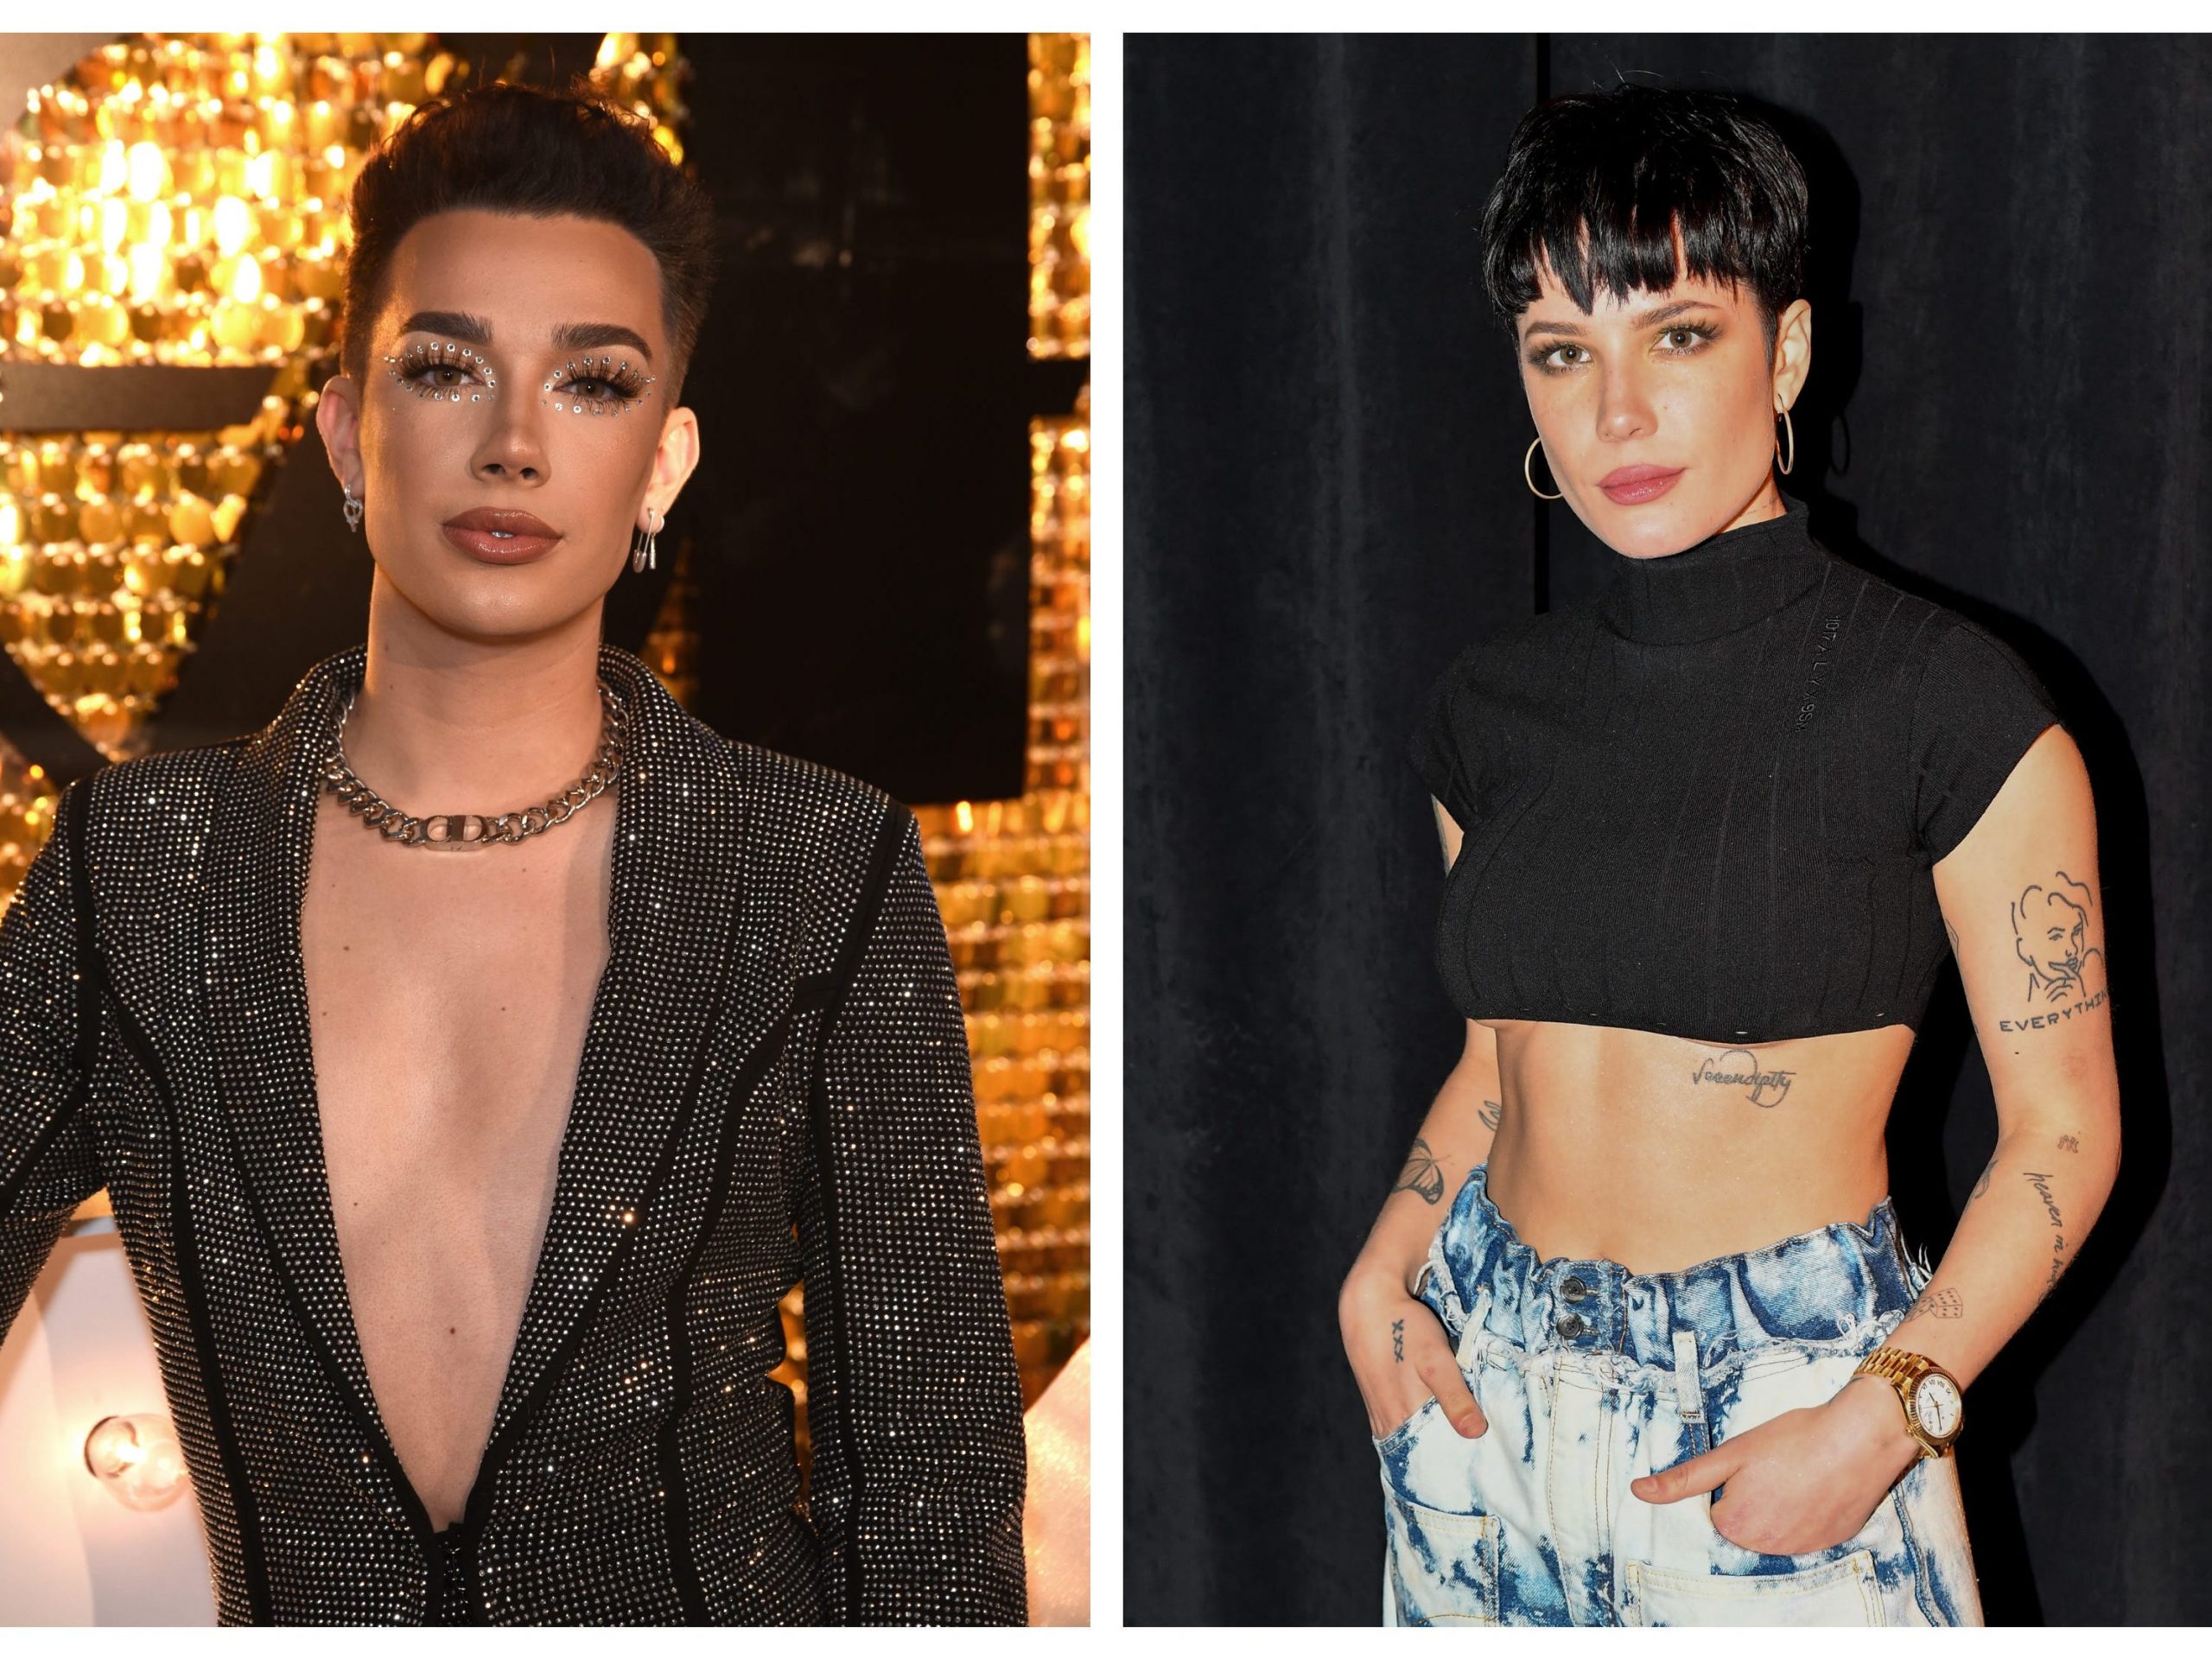 Fans lashed out at James Charles for his insensitive fake pregnancy photoshoot seemingly inspired by Halsey